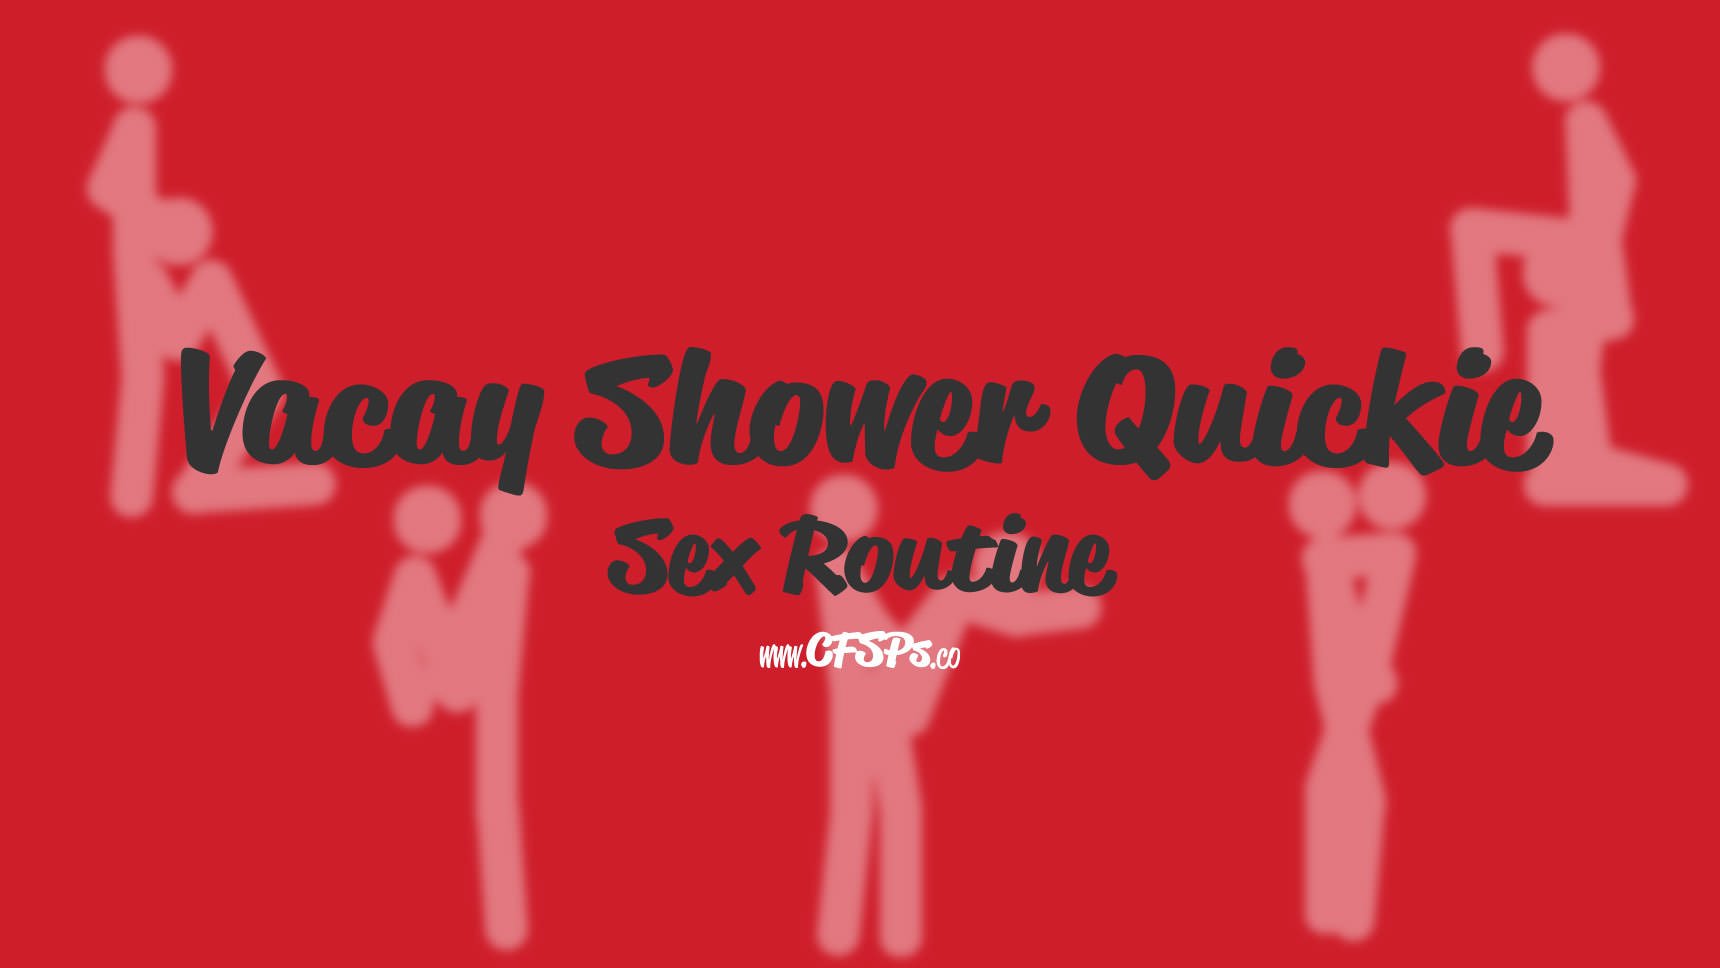 Vacay Shower Quickie Sex Routine